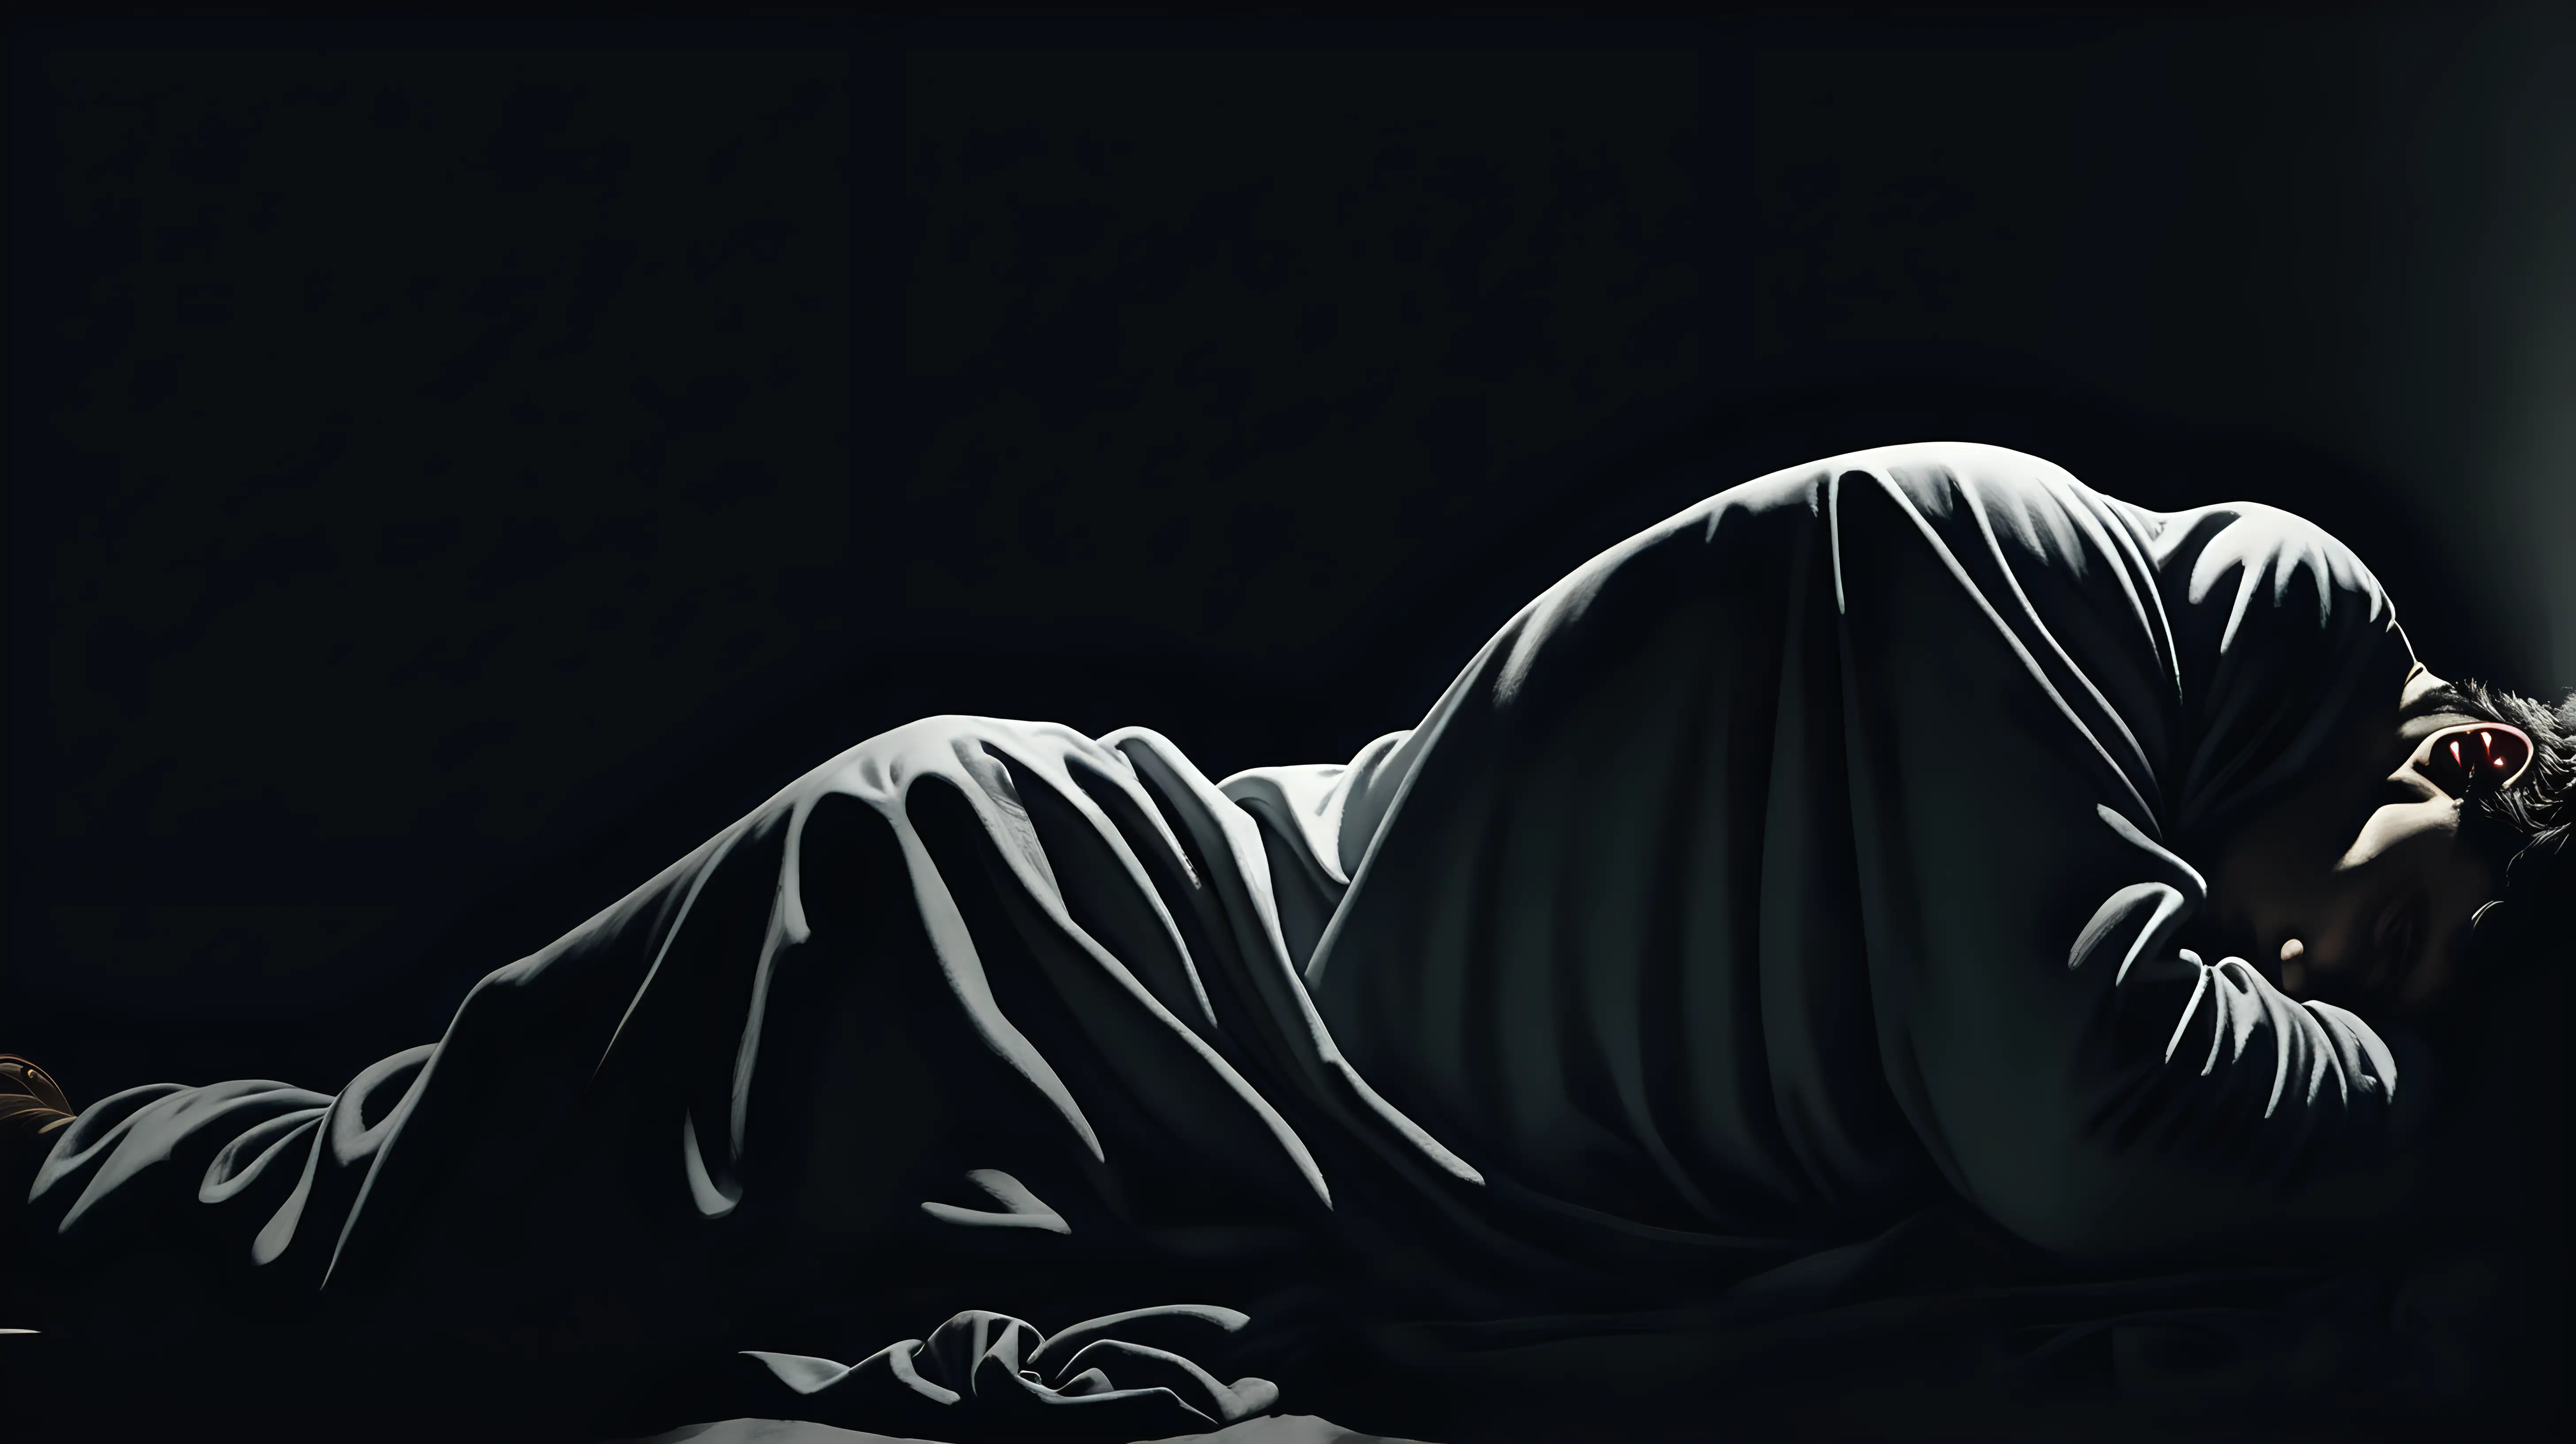 Darkness Concealed Man Lying Down Covered in Garment